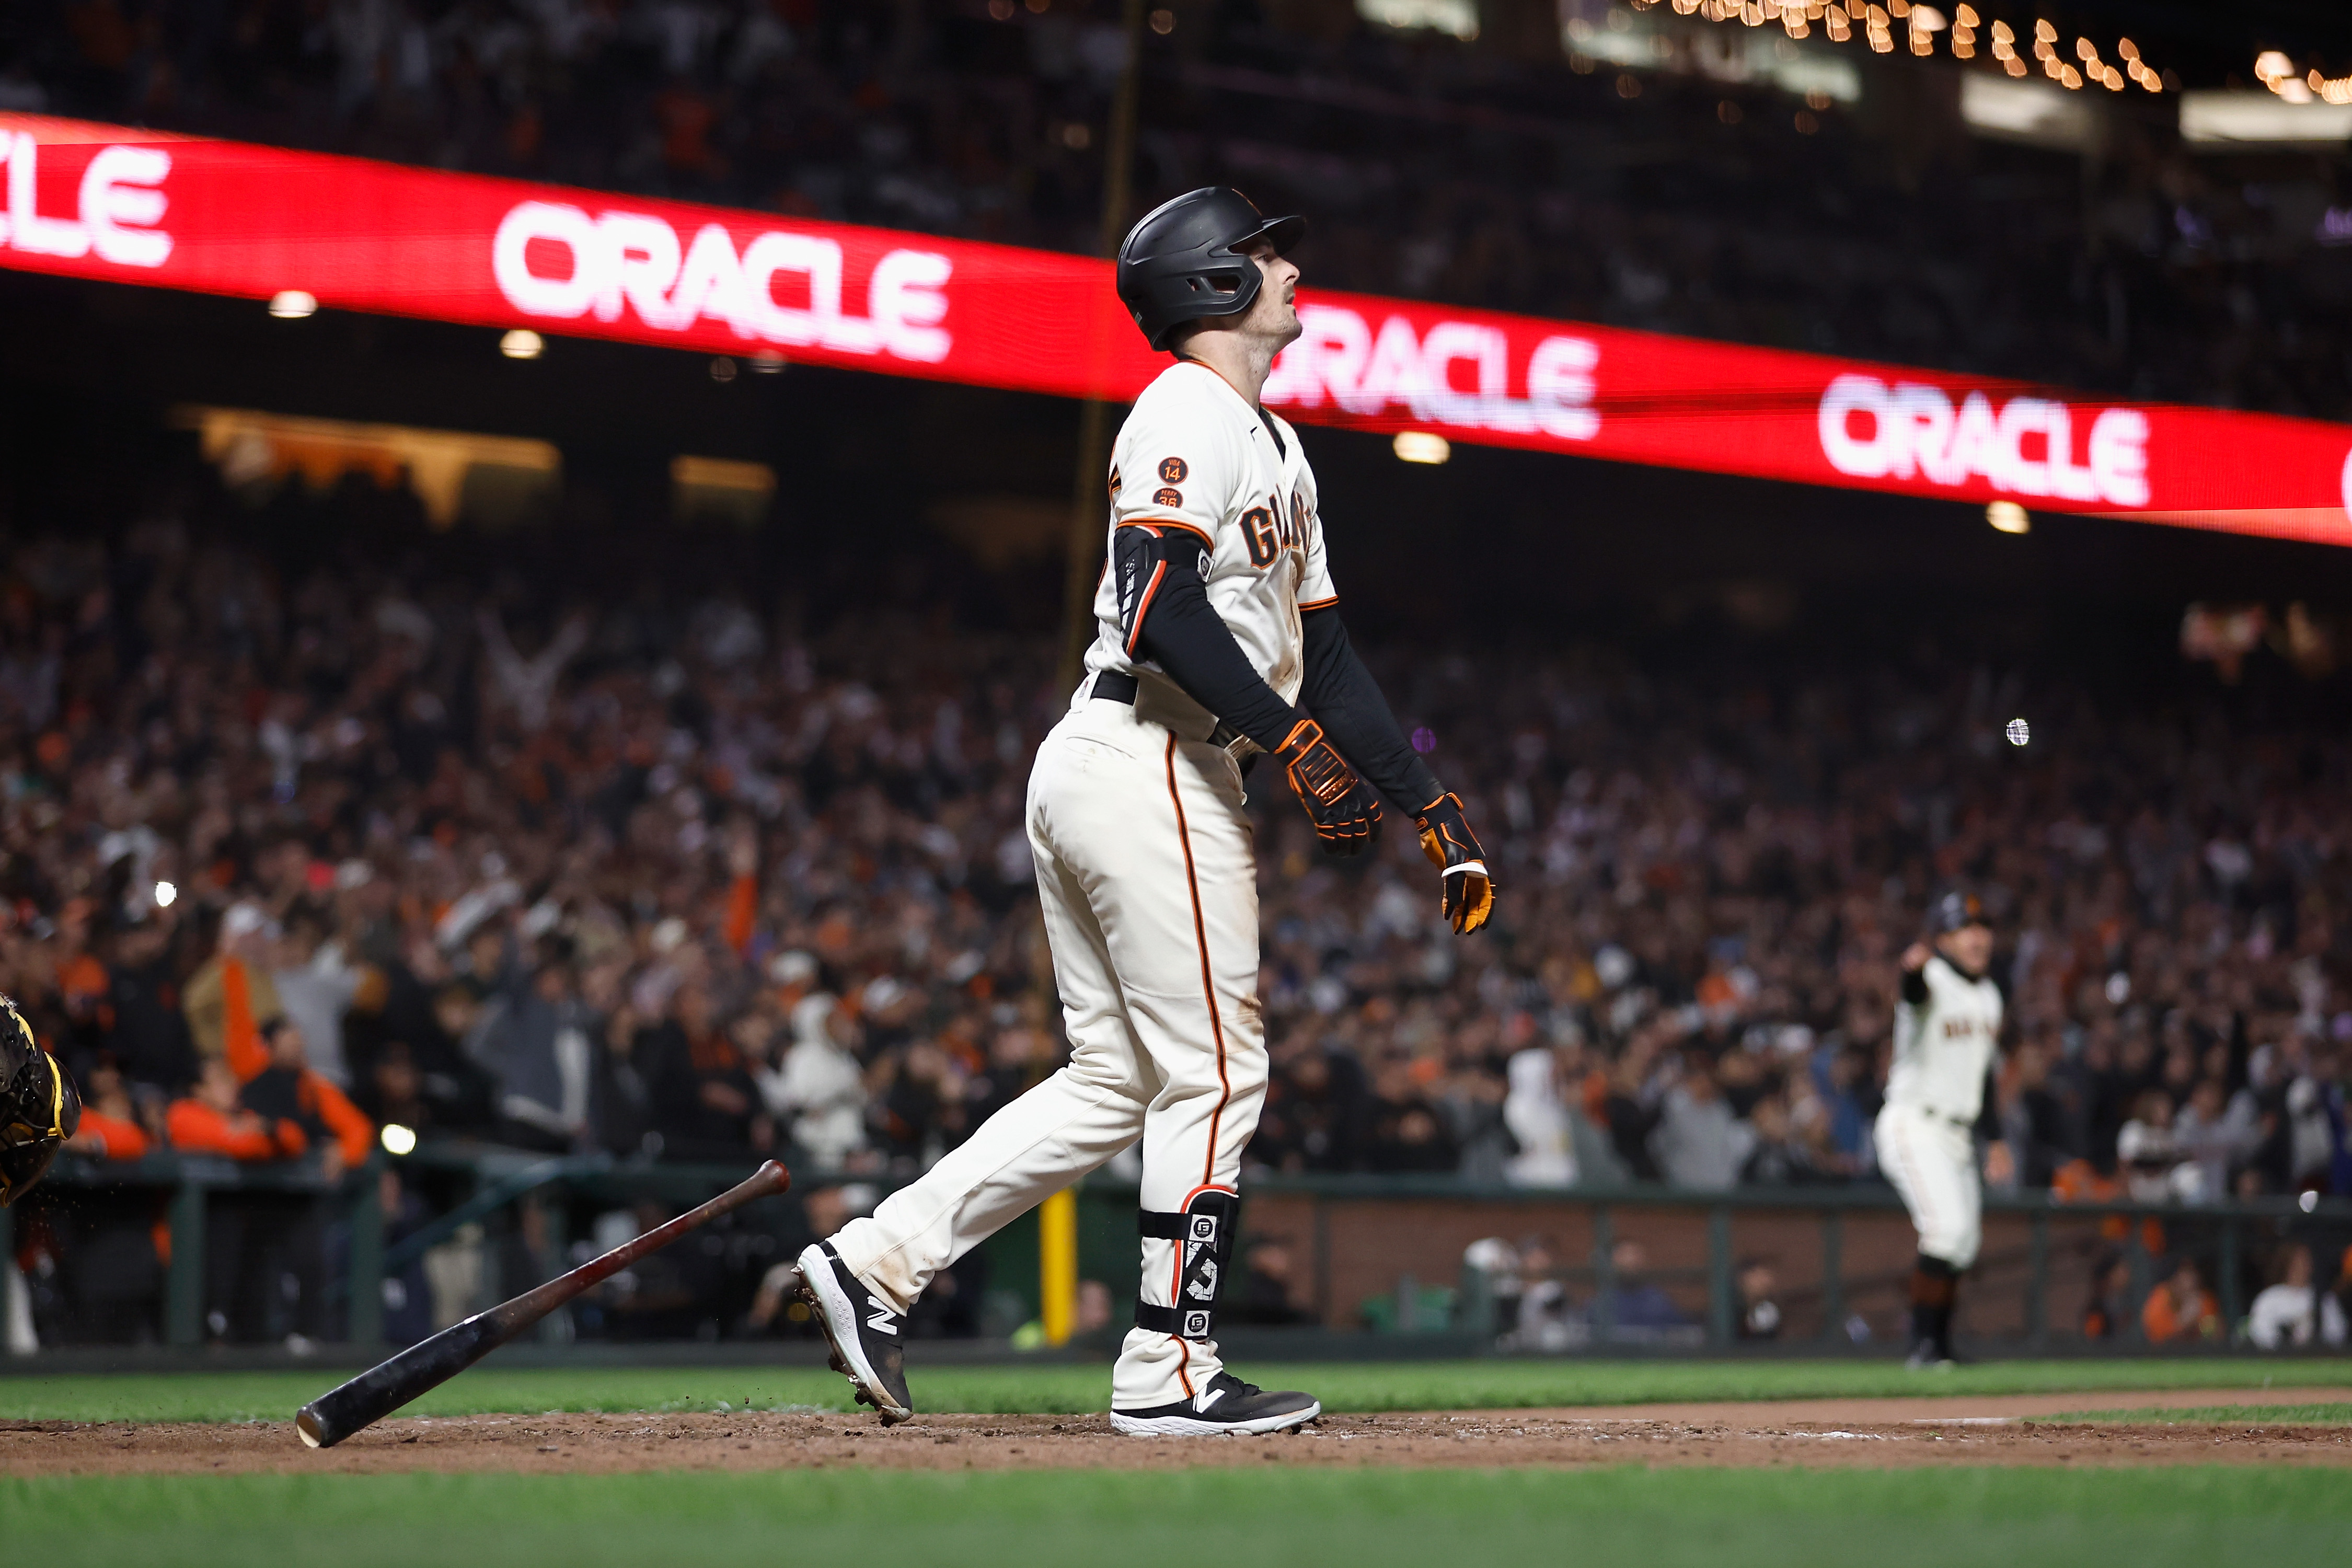 Yastrzemski splashes 3-run HR into McCovey Cove in the 10th as the